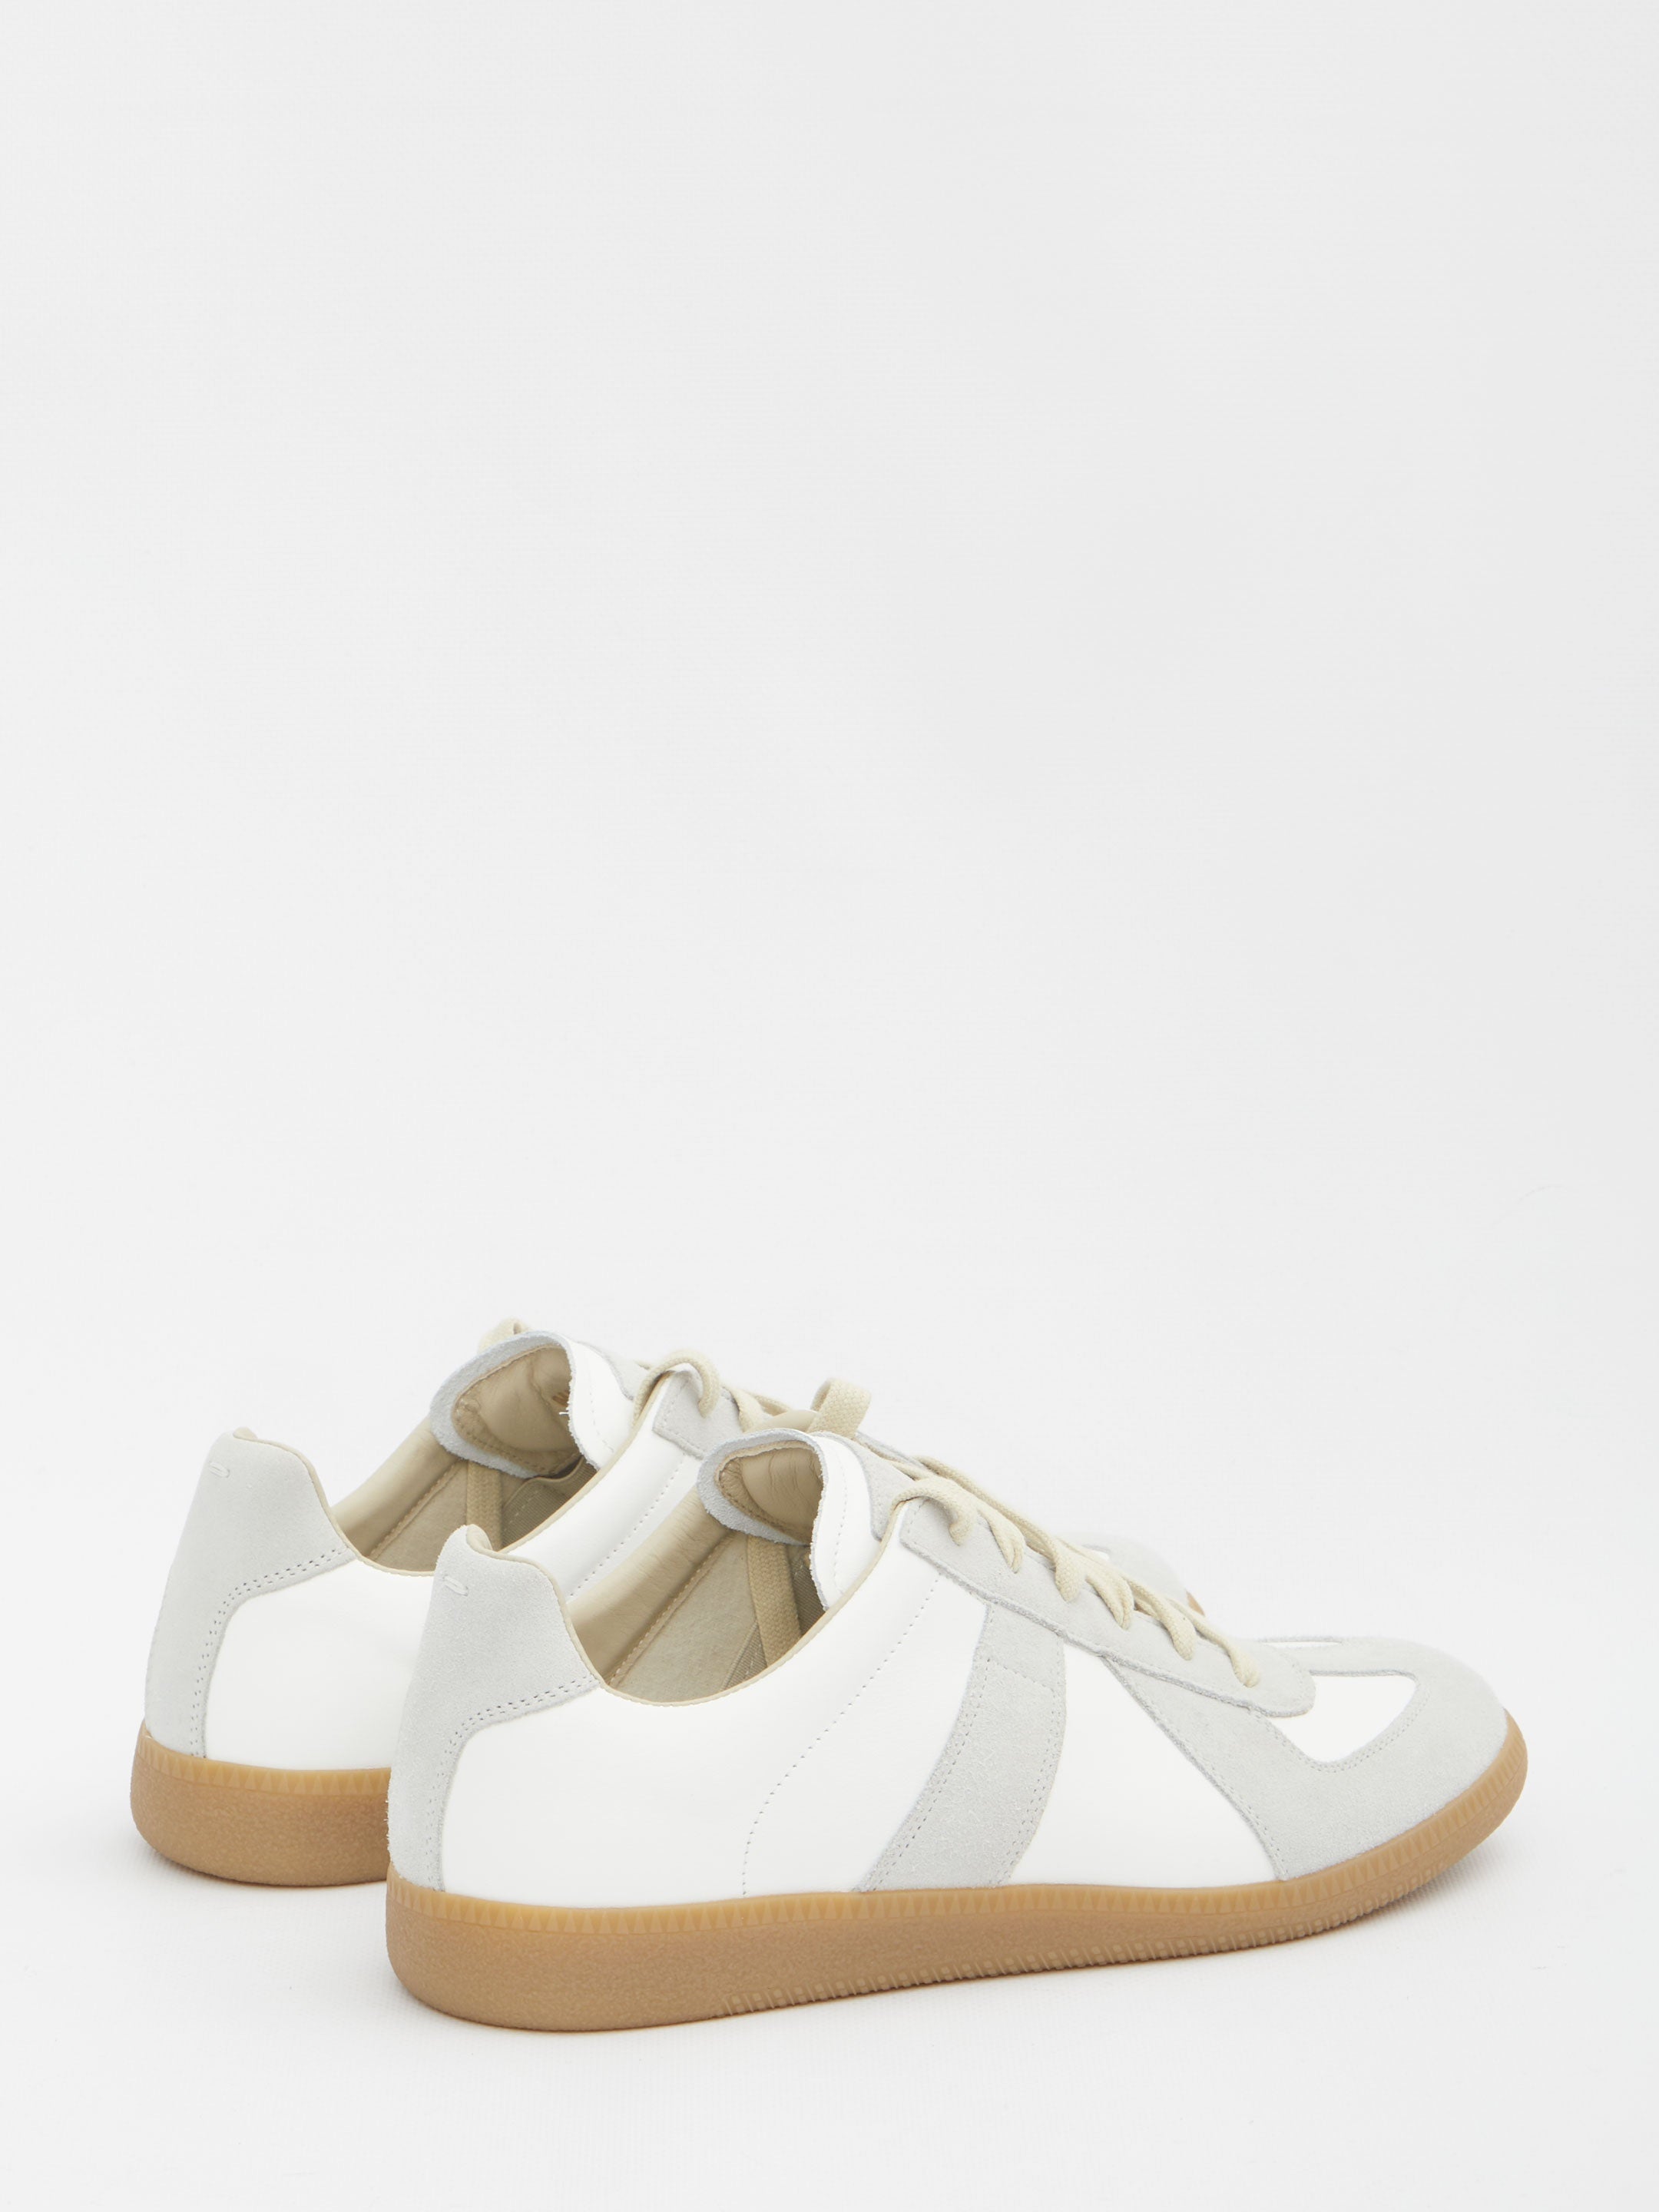 MAISON-MARGIELA-OUTLET-SALE-Replica-sneakers-Sneakers-ARCHIVE-COLLECTION-3_a7f03895-d619-479f-a45e-9a7012b55ef3.jpg